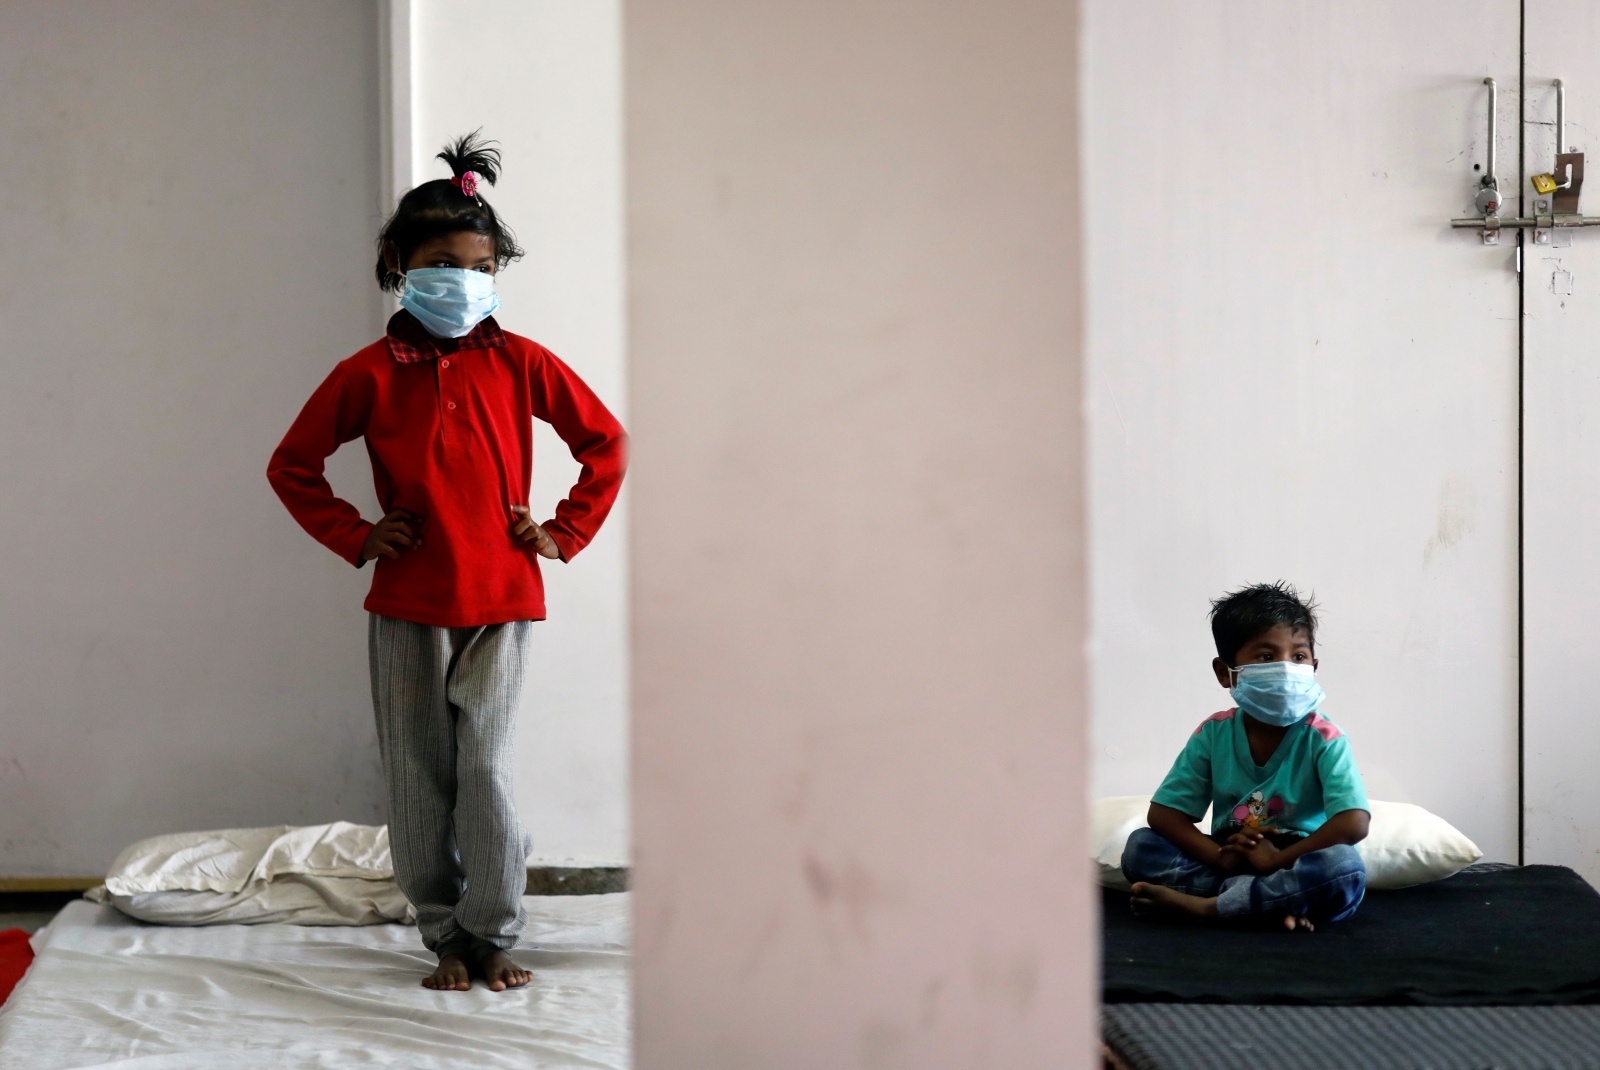 Lockdown to slow the spread of the coronavirus disease (COVID-19), in New Delhi Children of migrant workers wear protective masks inside a sports complex turned into a shelter, during a 21-day nationwide lockdown to slow the spread of the coronavirus disease (COVID-19), in New Delhi, India, April 4, 2020. REUTERS/Adnan Abidi ADNAN ABIDI